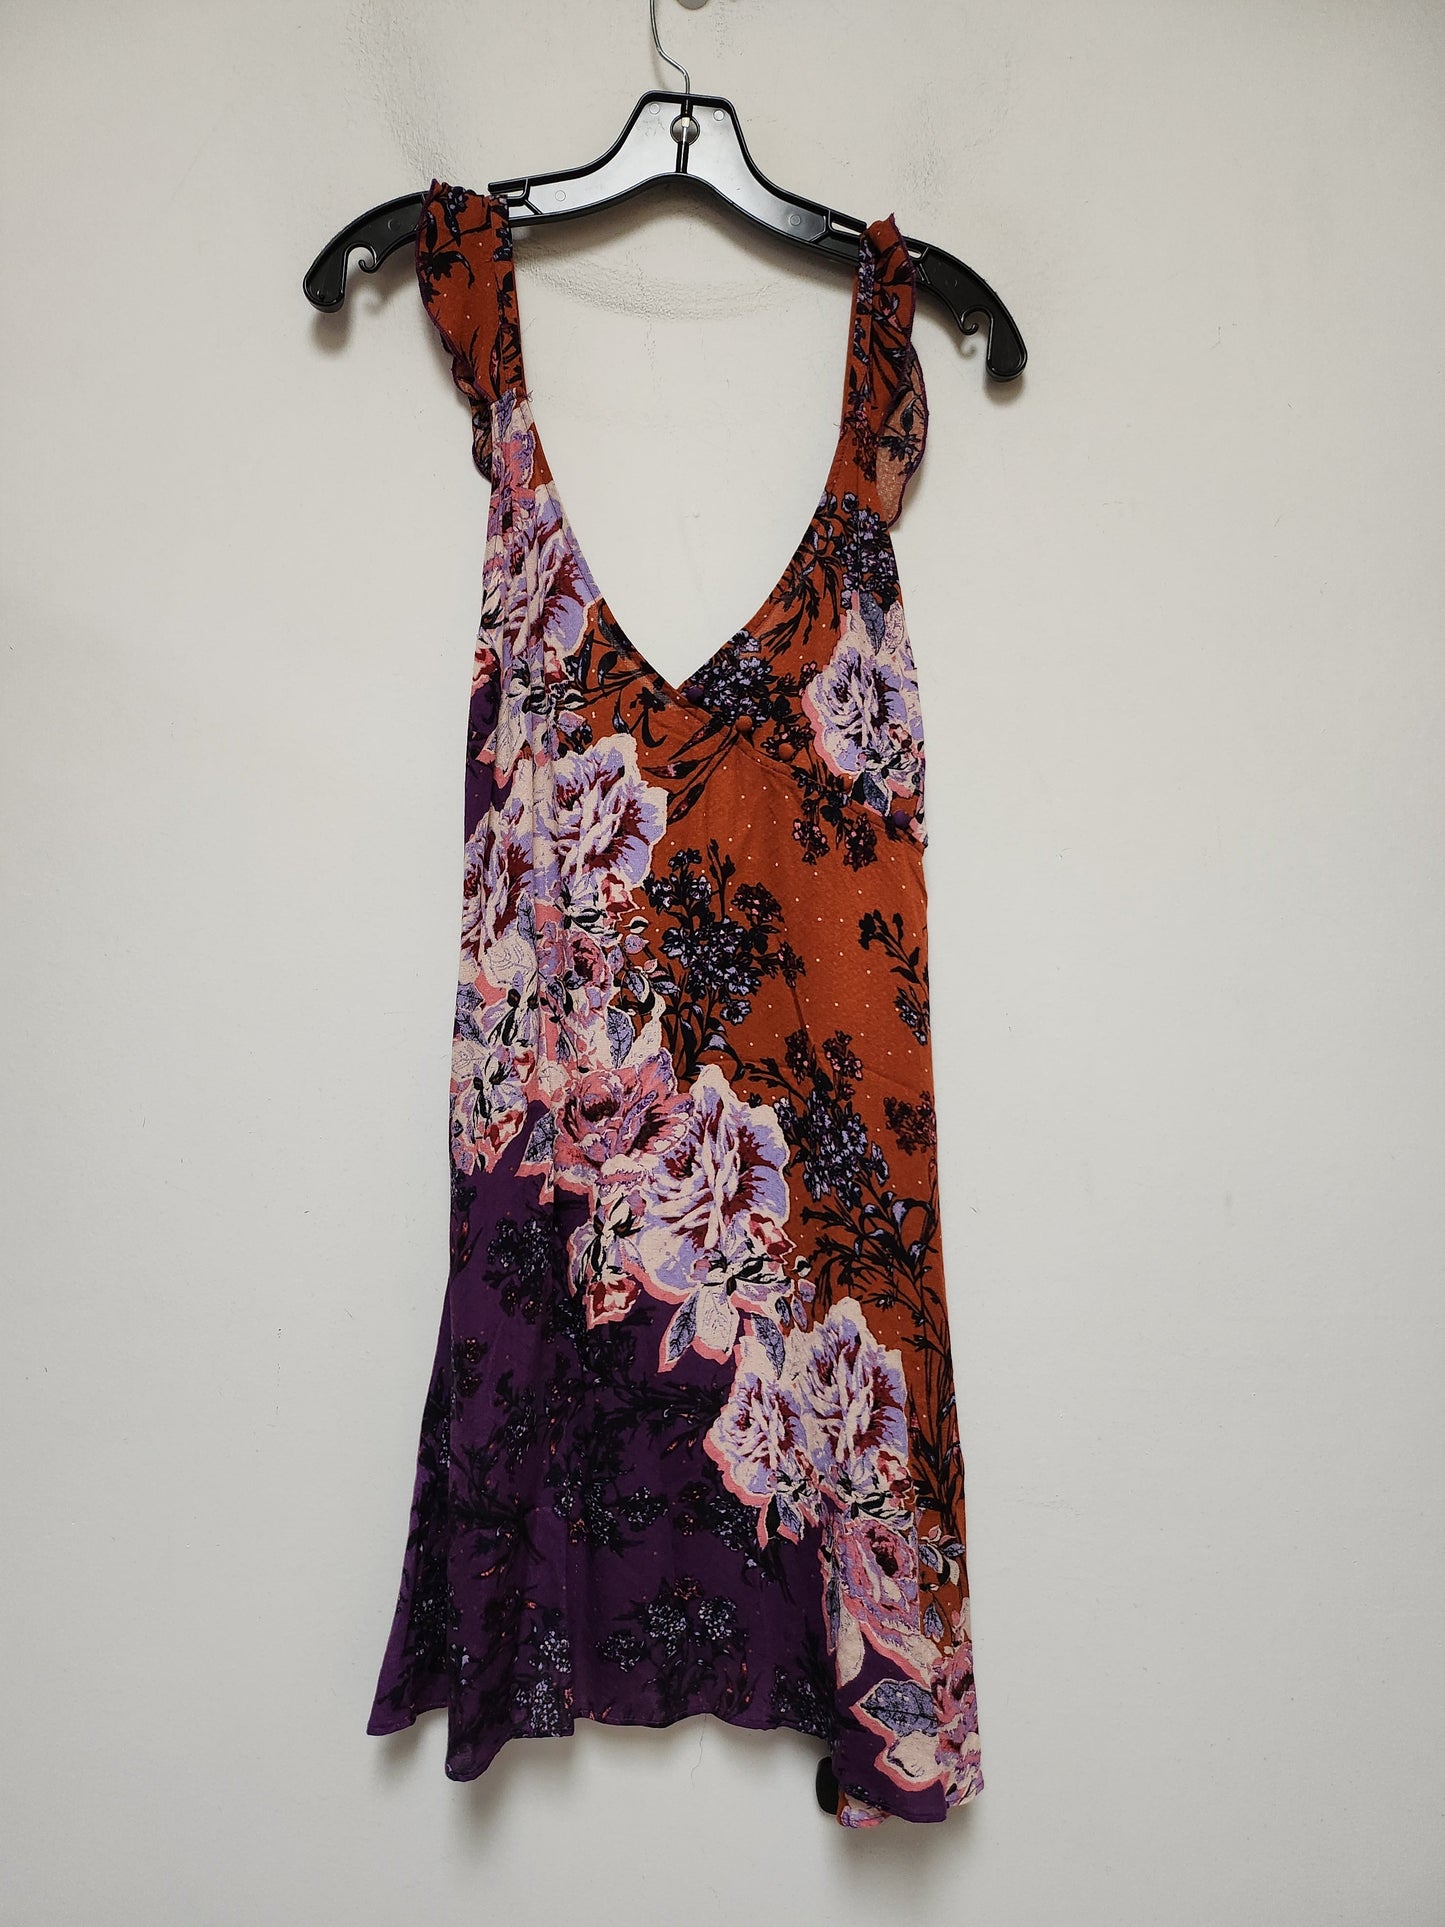 Floral Print Top Sleeveless Free People, Size M